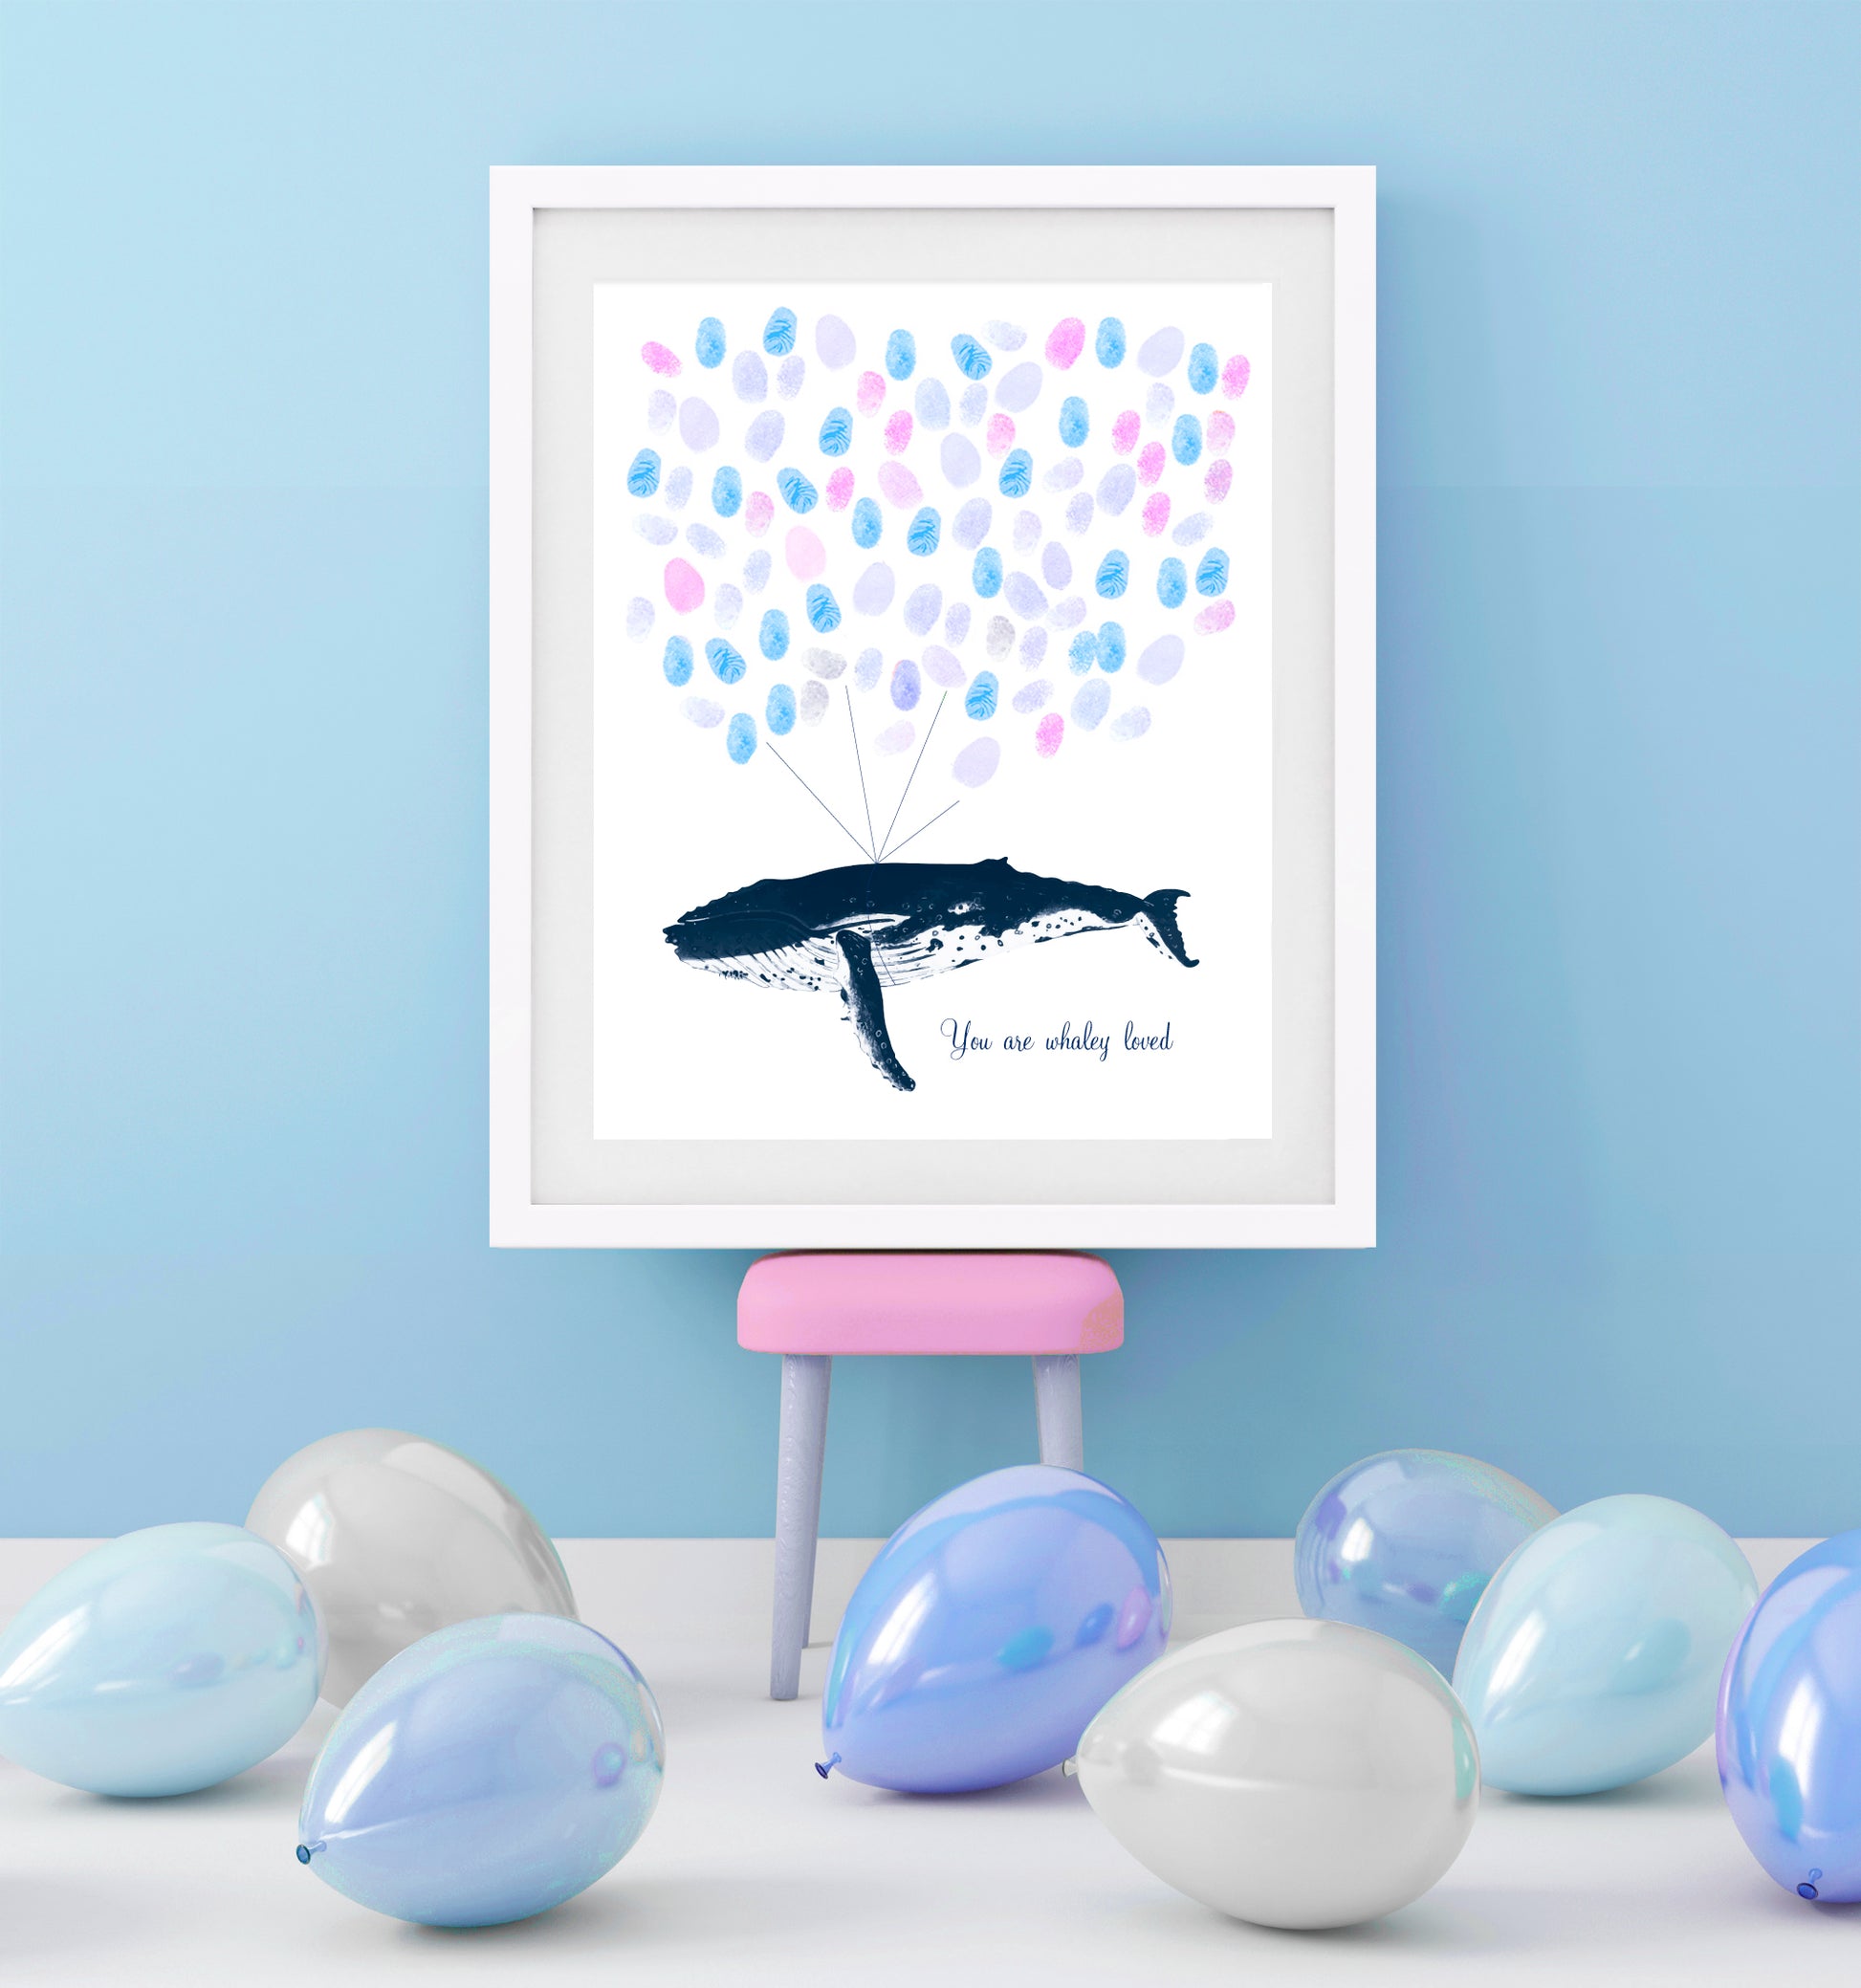 Humpback Whale Fingerprint Guest Book in a blue party room surrounded by balloons